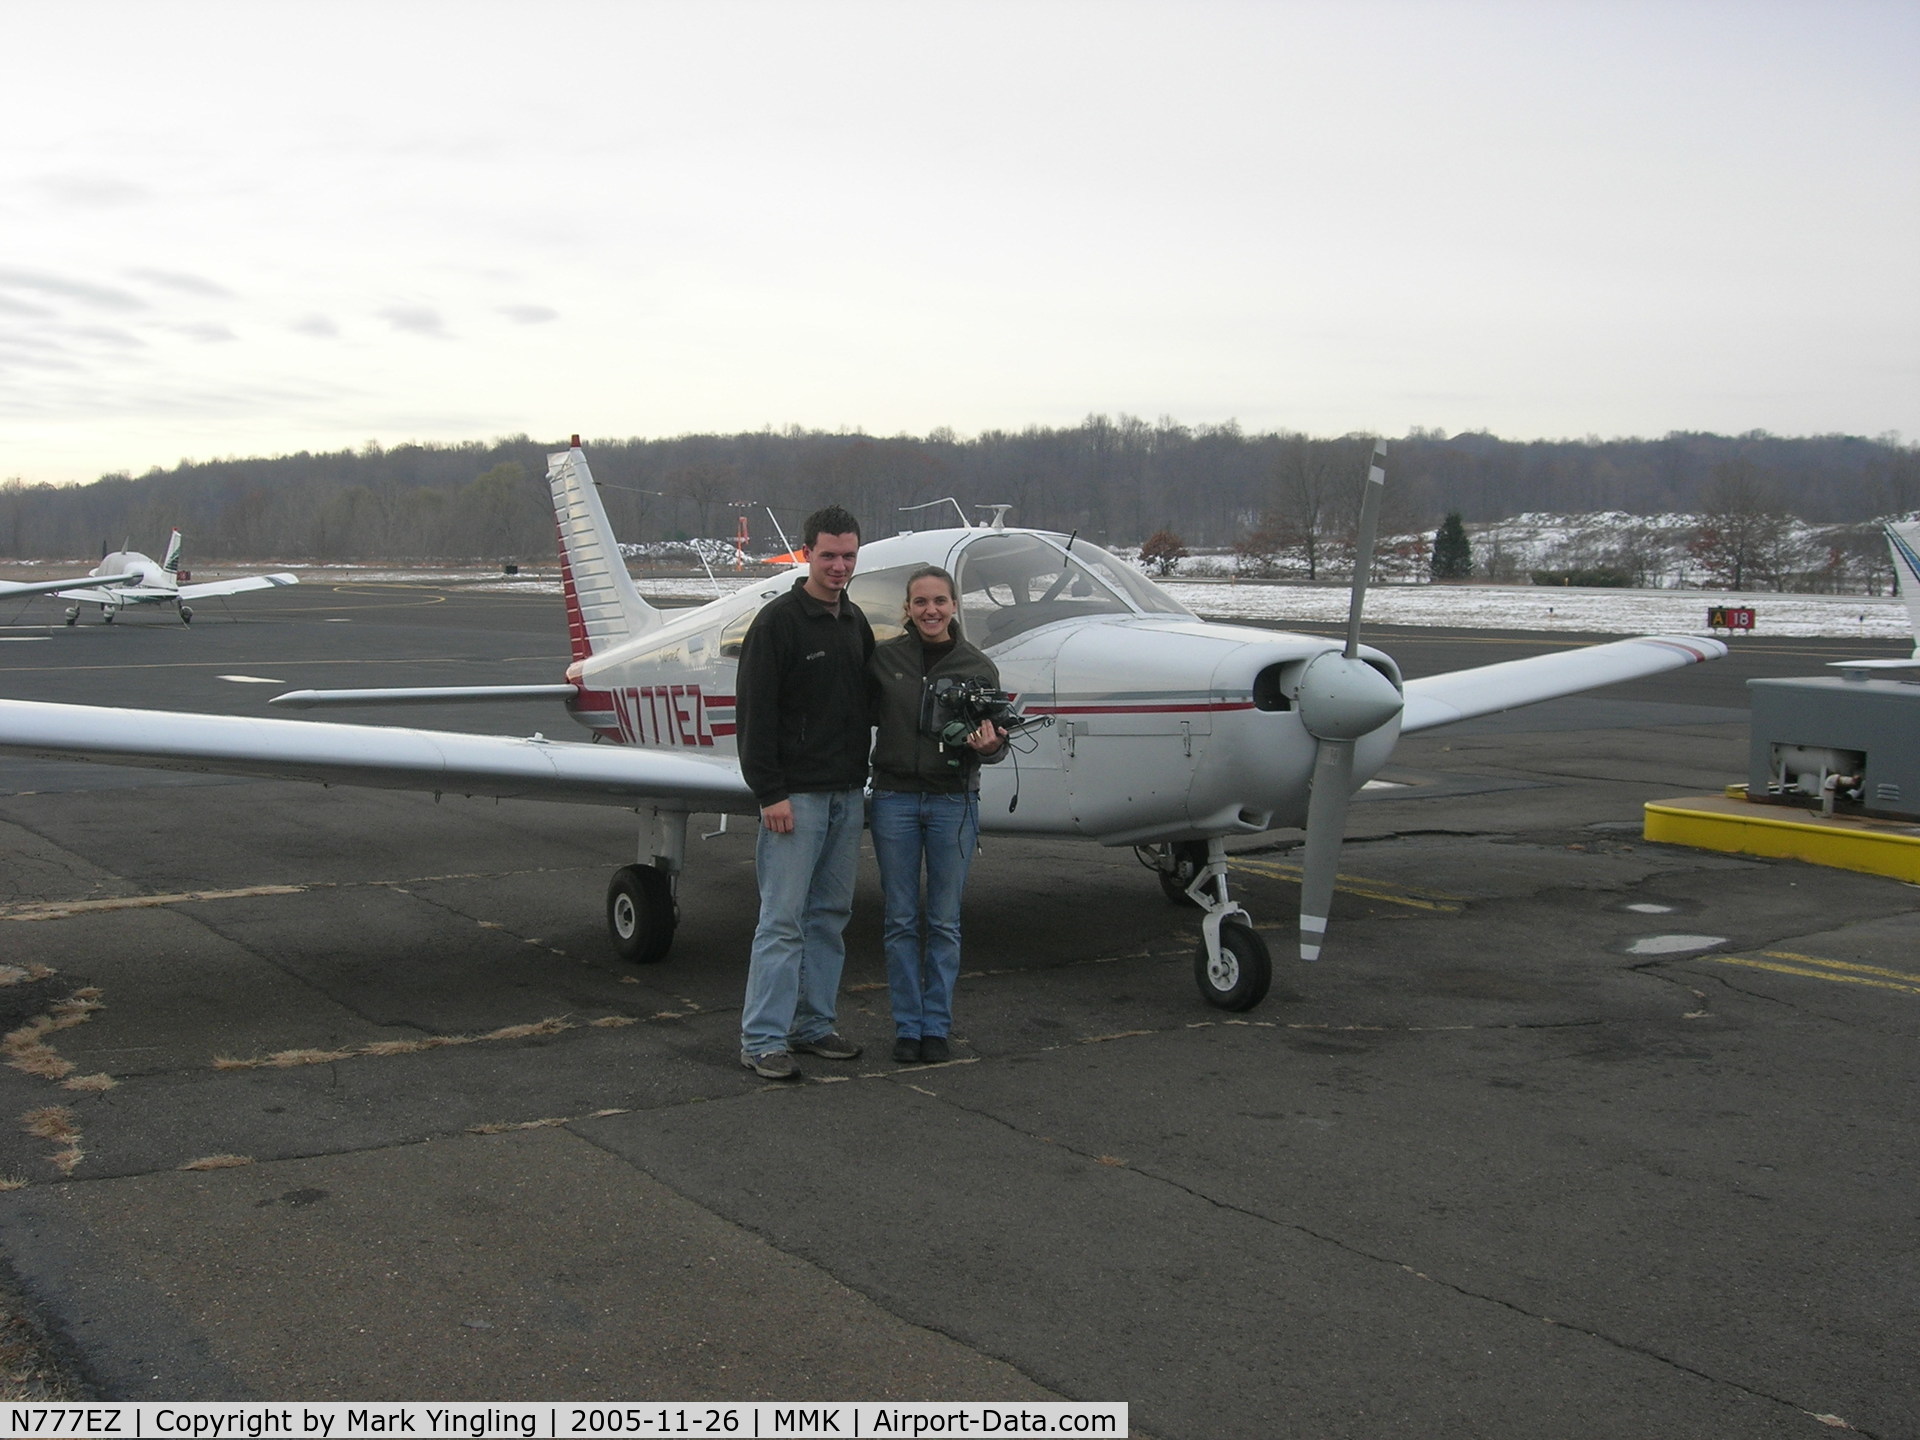 N777EZ, 1978 Piper PA-28-161 C/N 28-7916216, Student and instructor in front of specific Piper Warrior.  In picture: Michael Yingling (student) and Melanie Lackman (instructor)